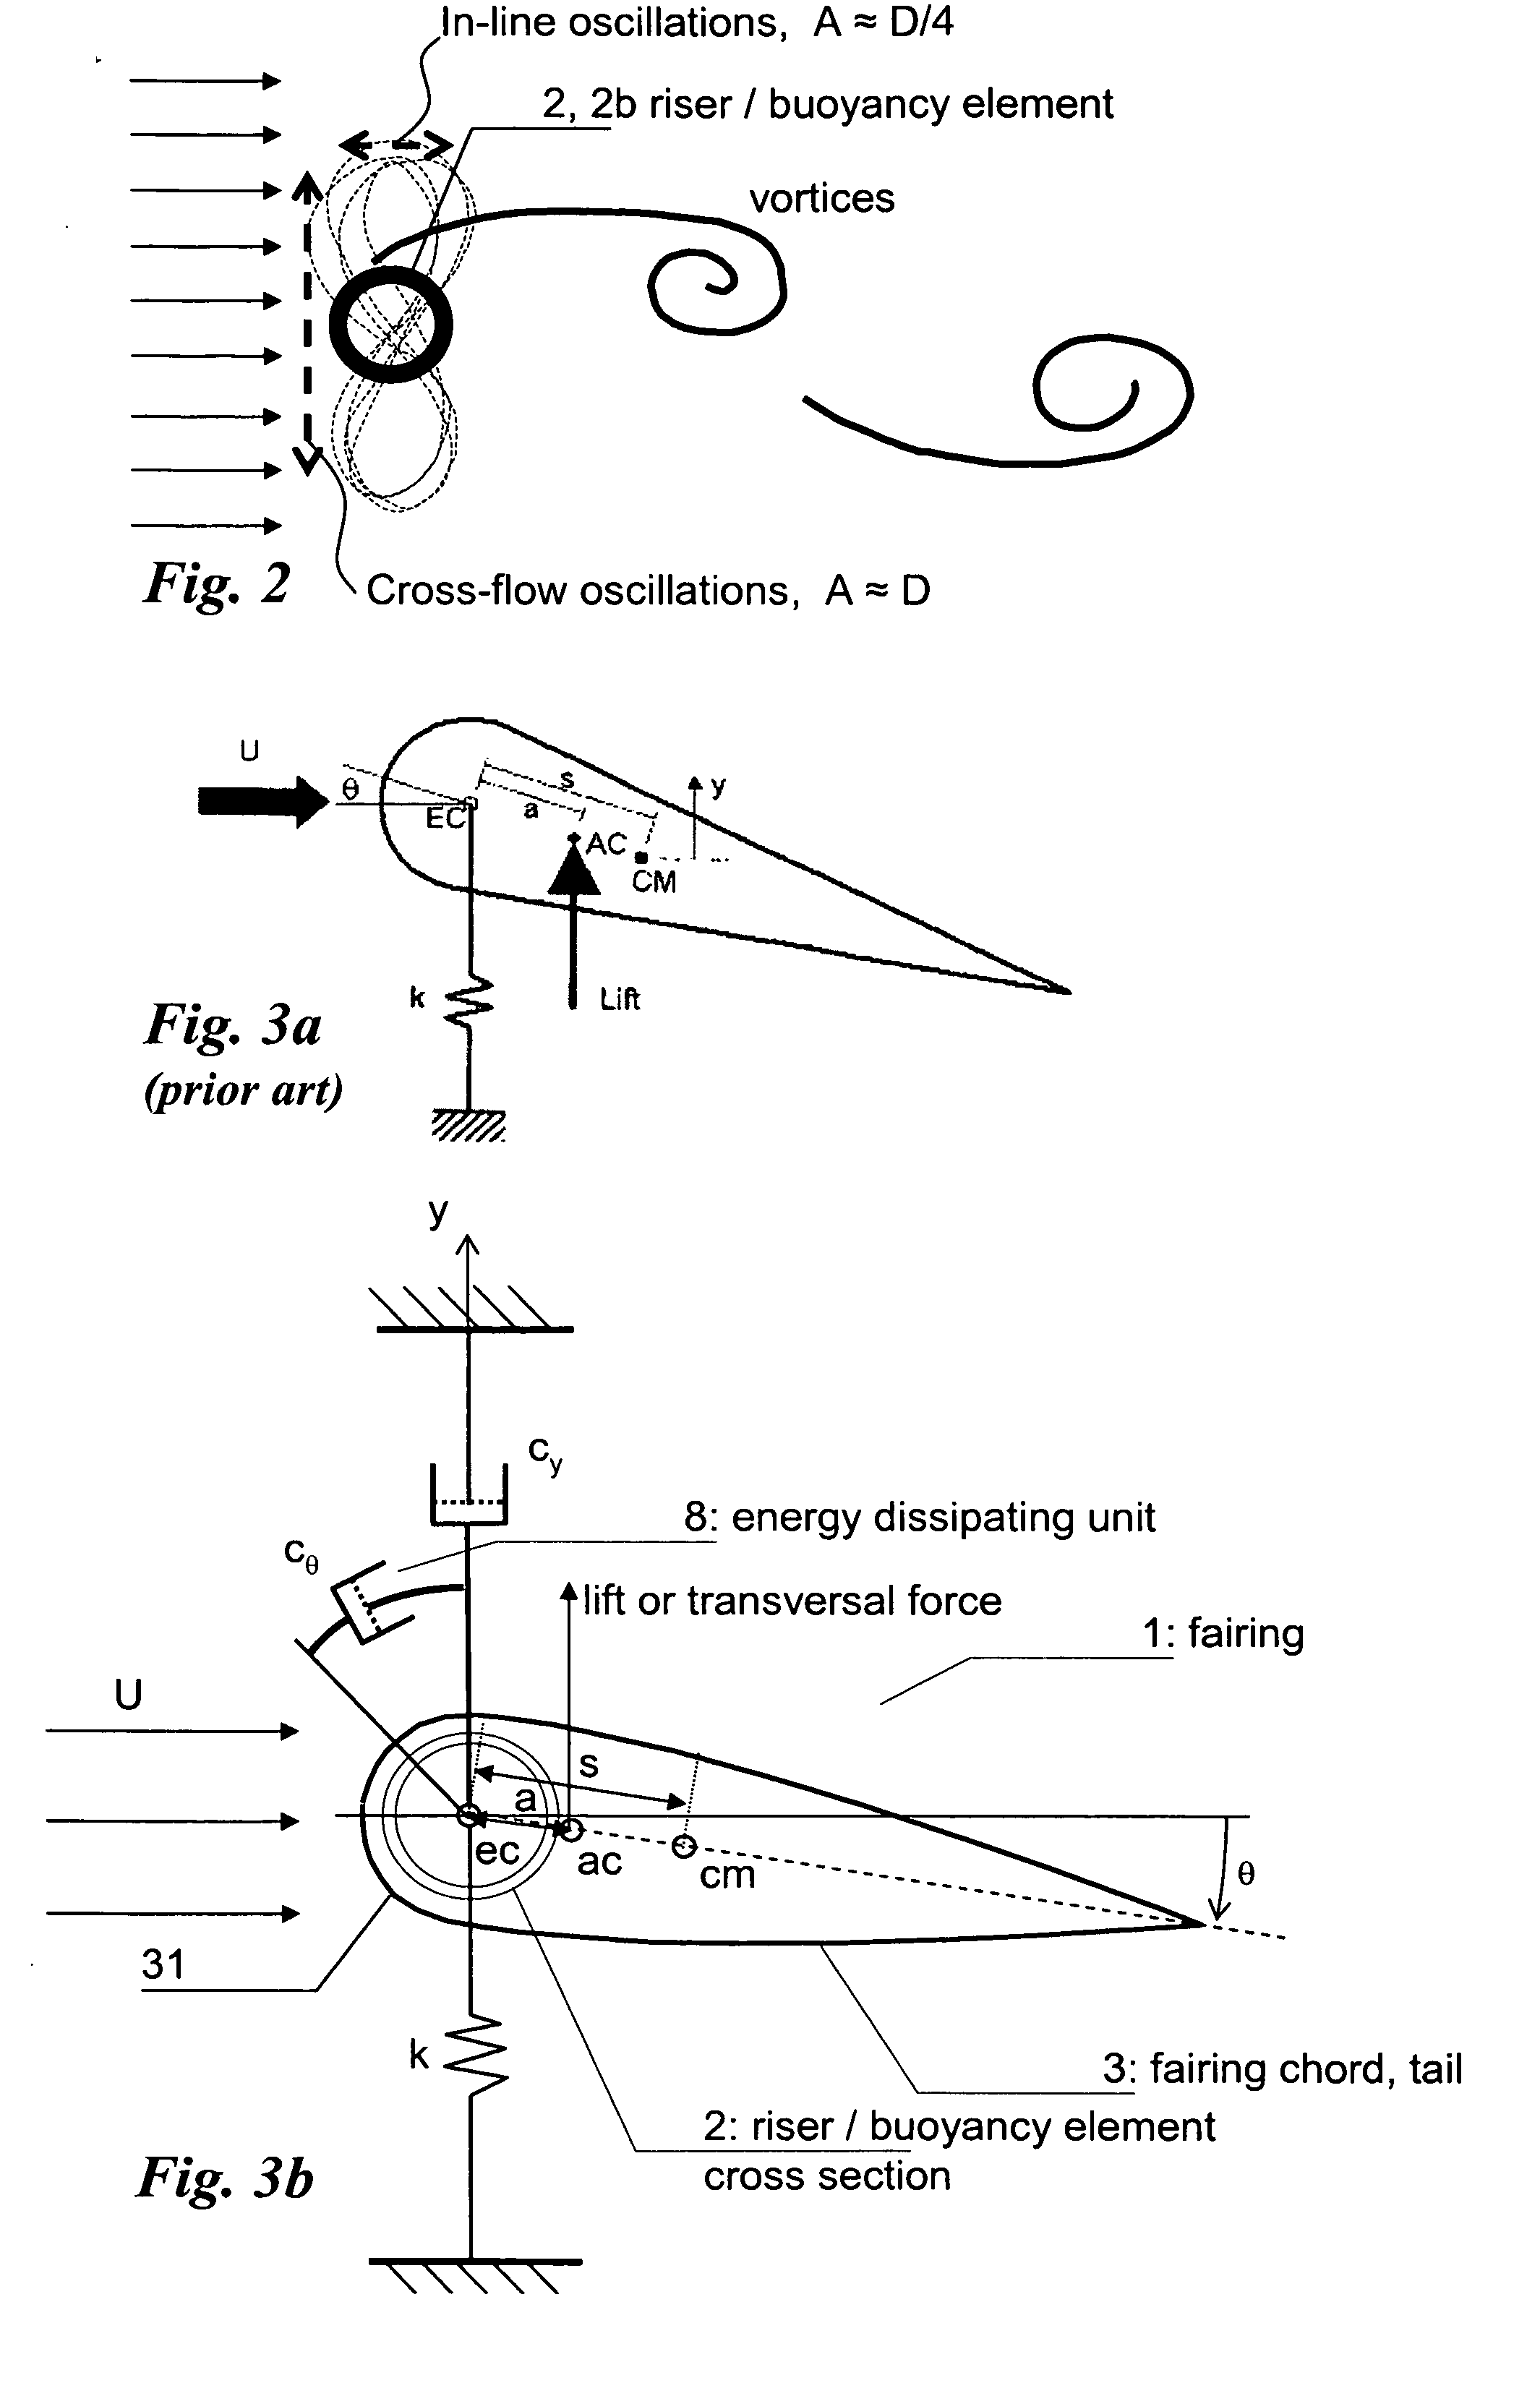 Fairing for reducing watercurrent-induced stresses on a marine riser